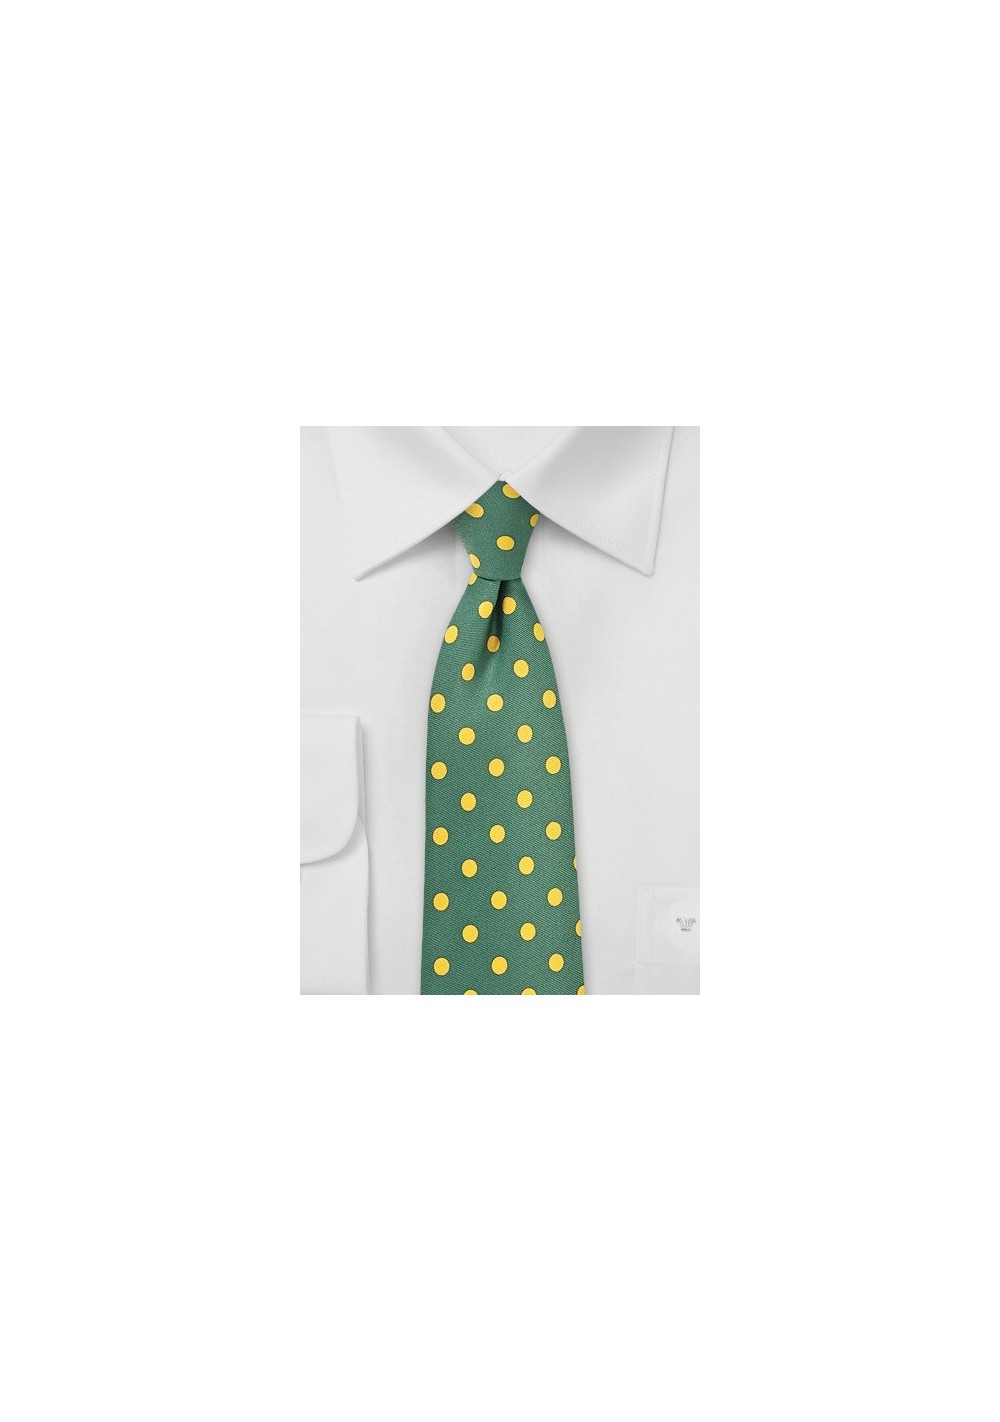 Green Necktie with Bright Yellow Polka Dots